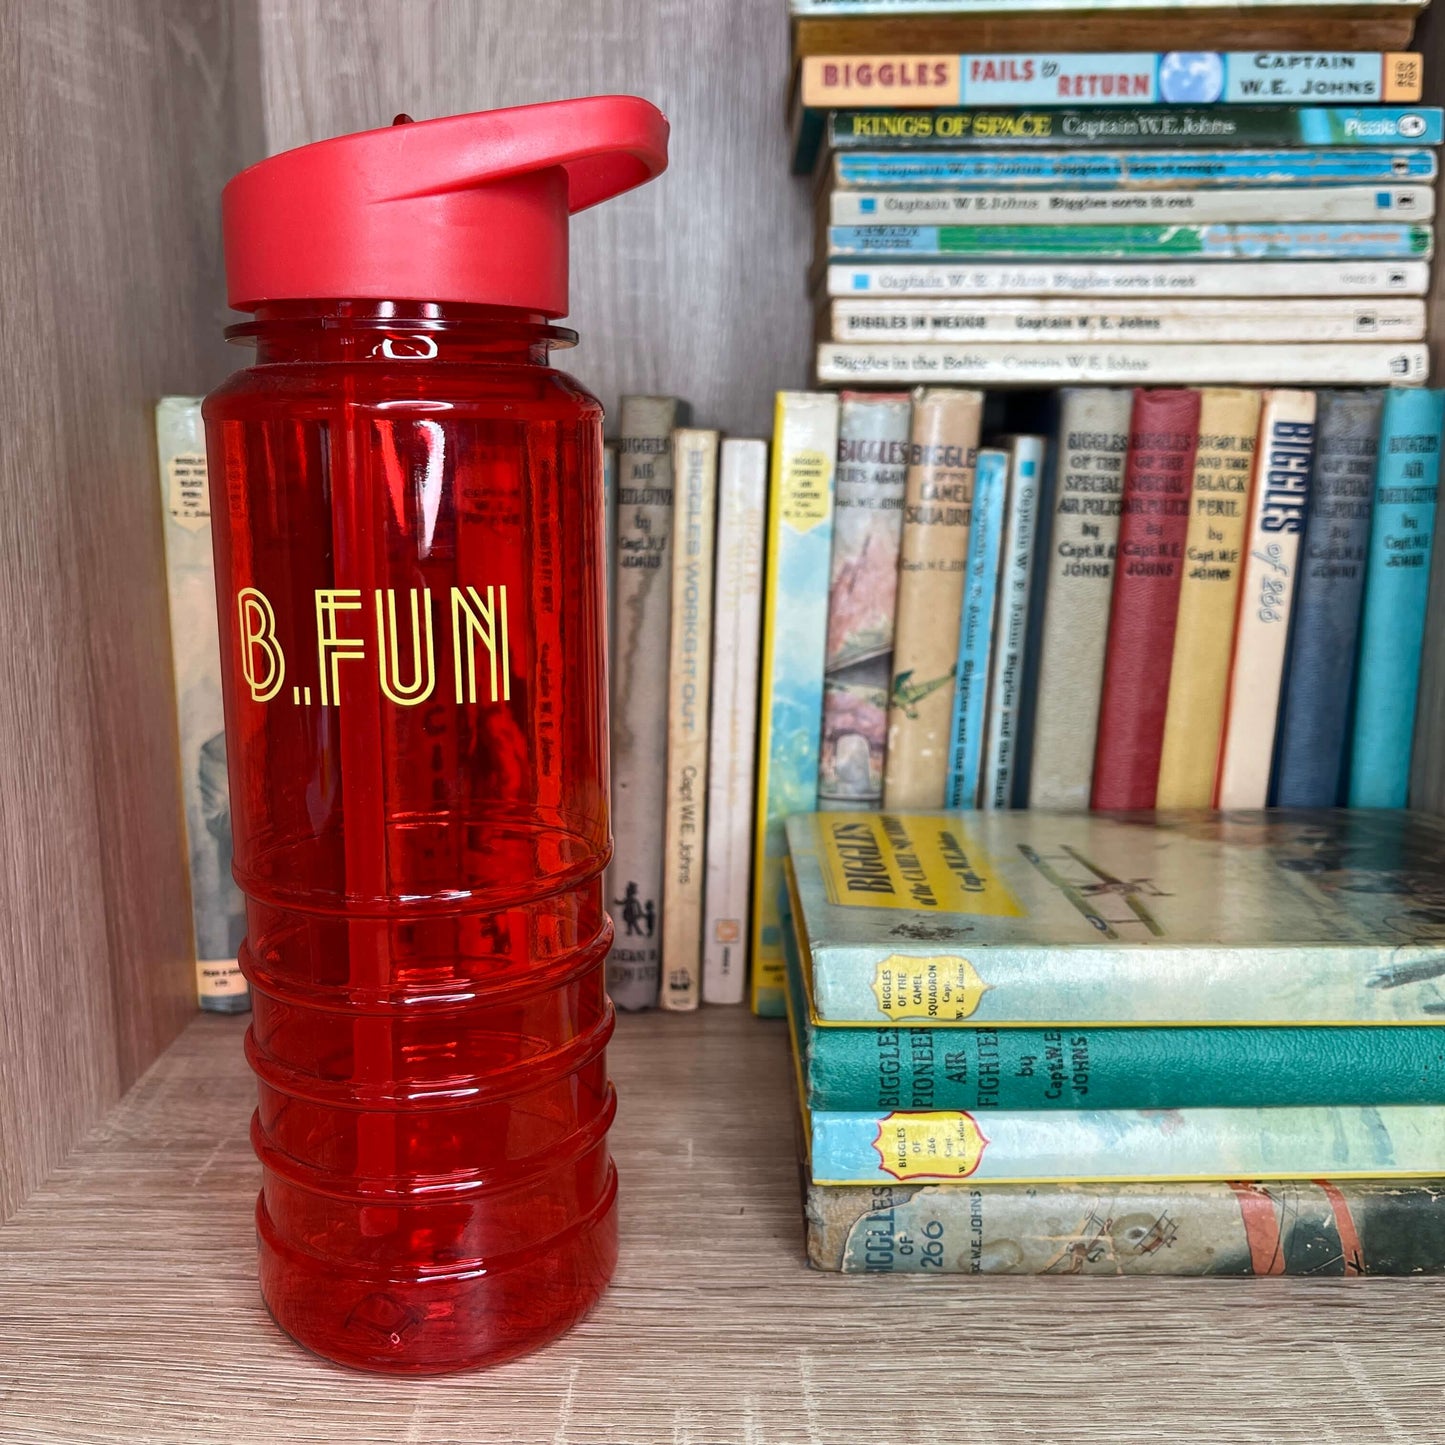 Bright red plastic sports water bottle with B=Fun printed on it sitting on a book shelf next to vintage books.